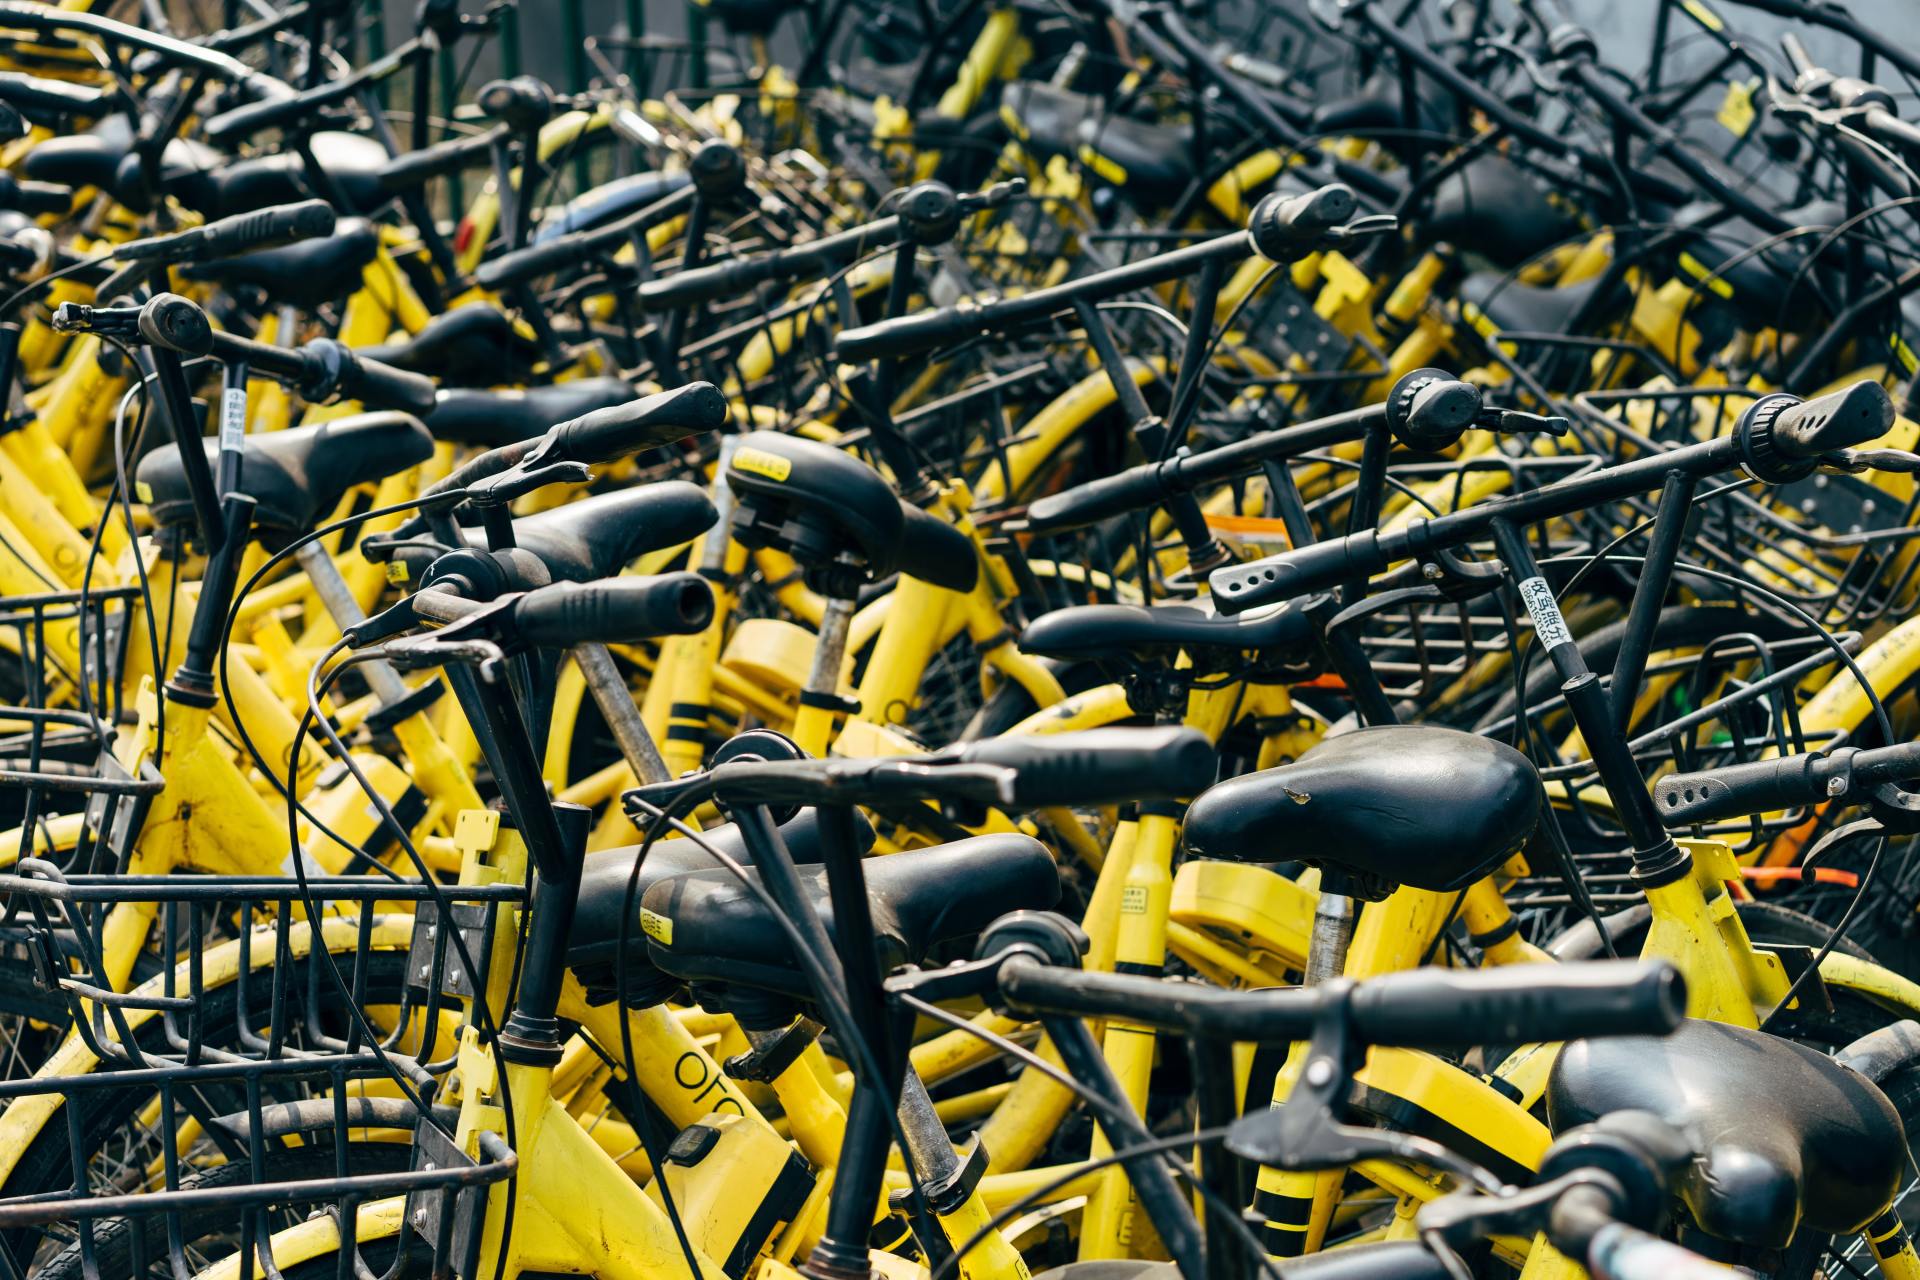 Several yellow bikes with baskets standing next to each other placed  in an urban area.